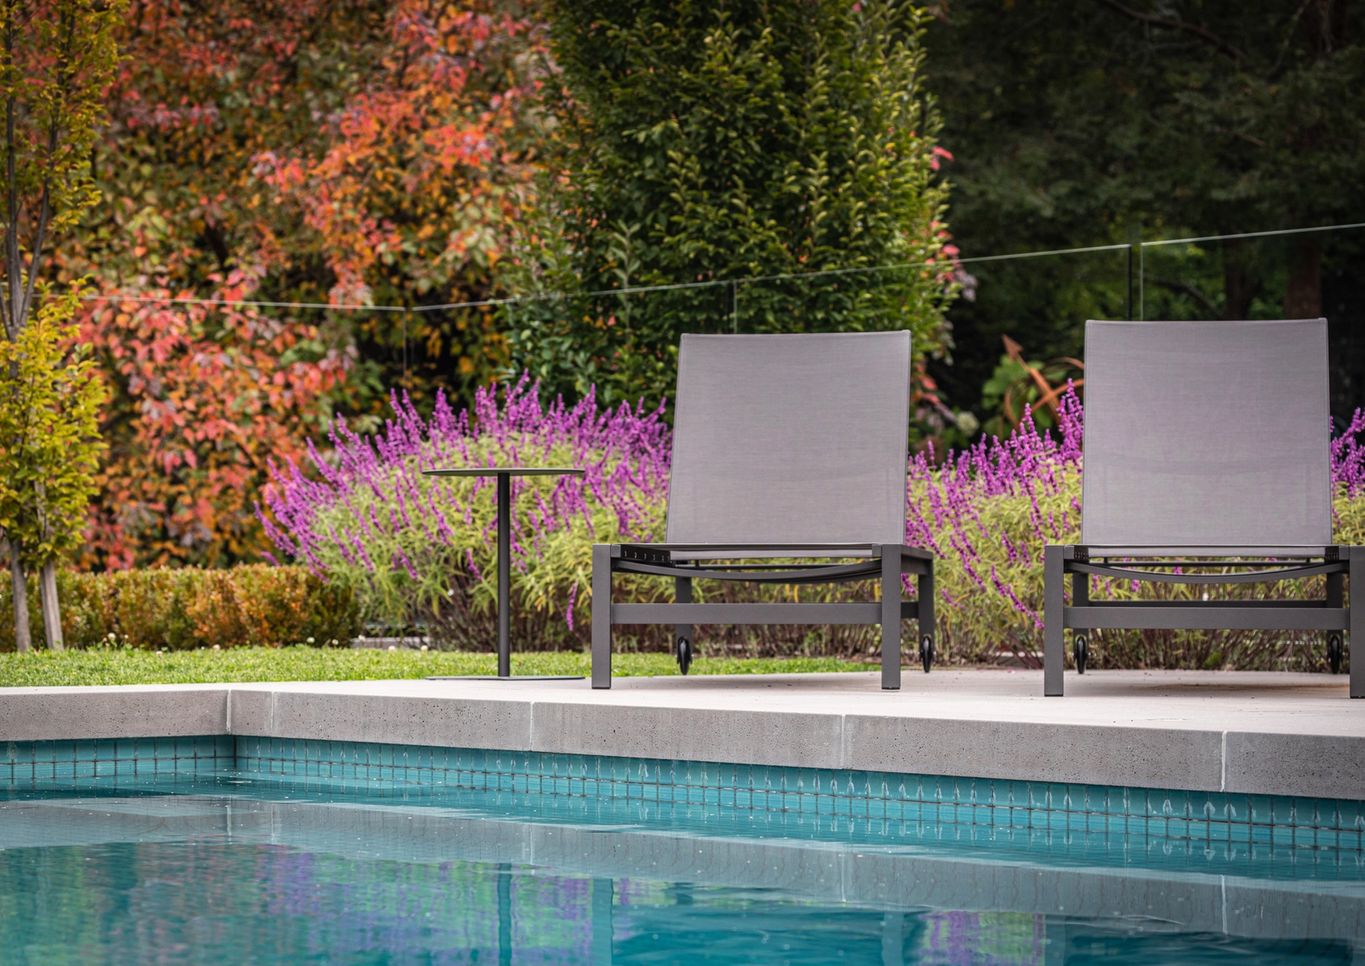 Pool and spa with sun loungers overlooking Macedon Ranges